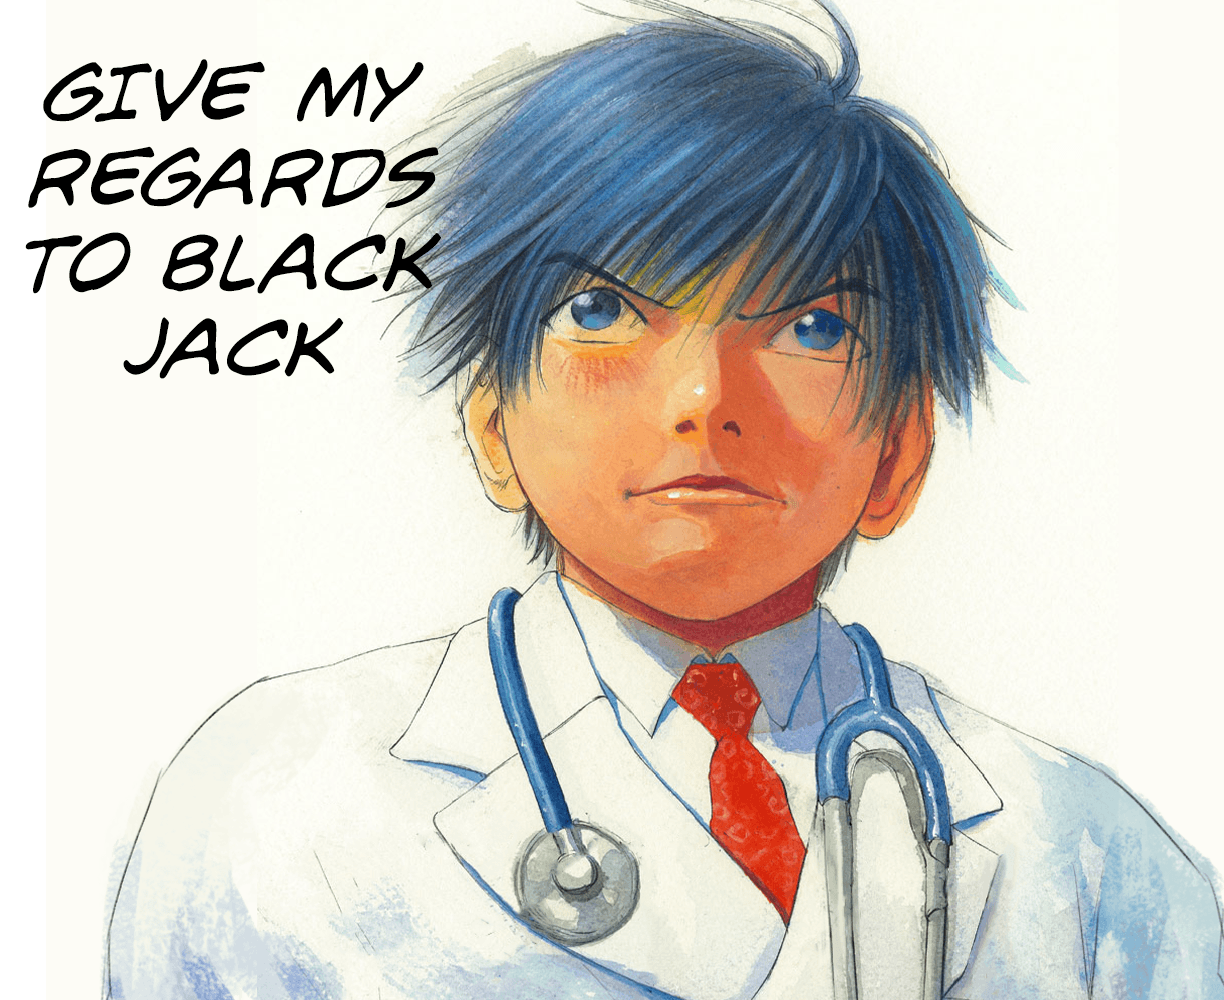 The cover art for the episode 500 CC IV from the comics series Give My Regards to Black Jack, which is number 50 in the series